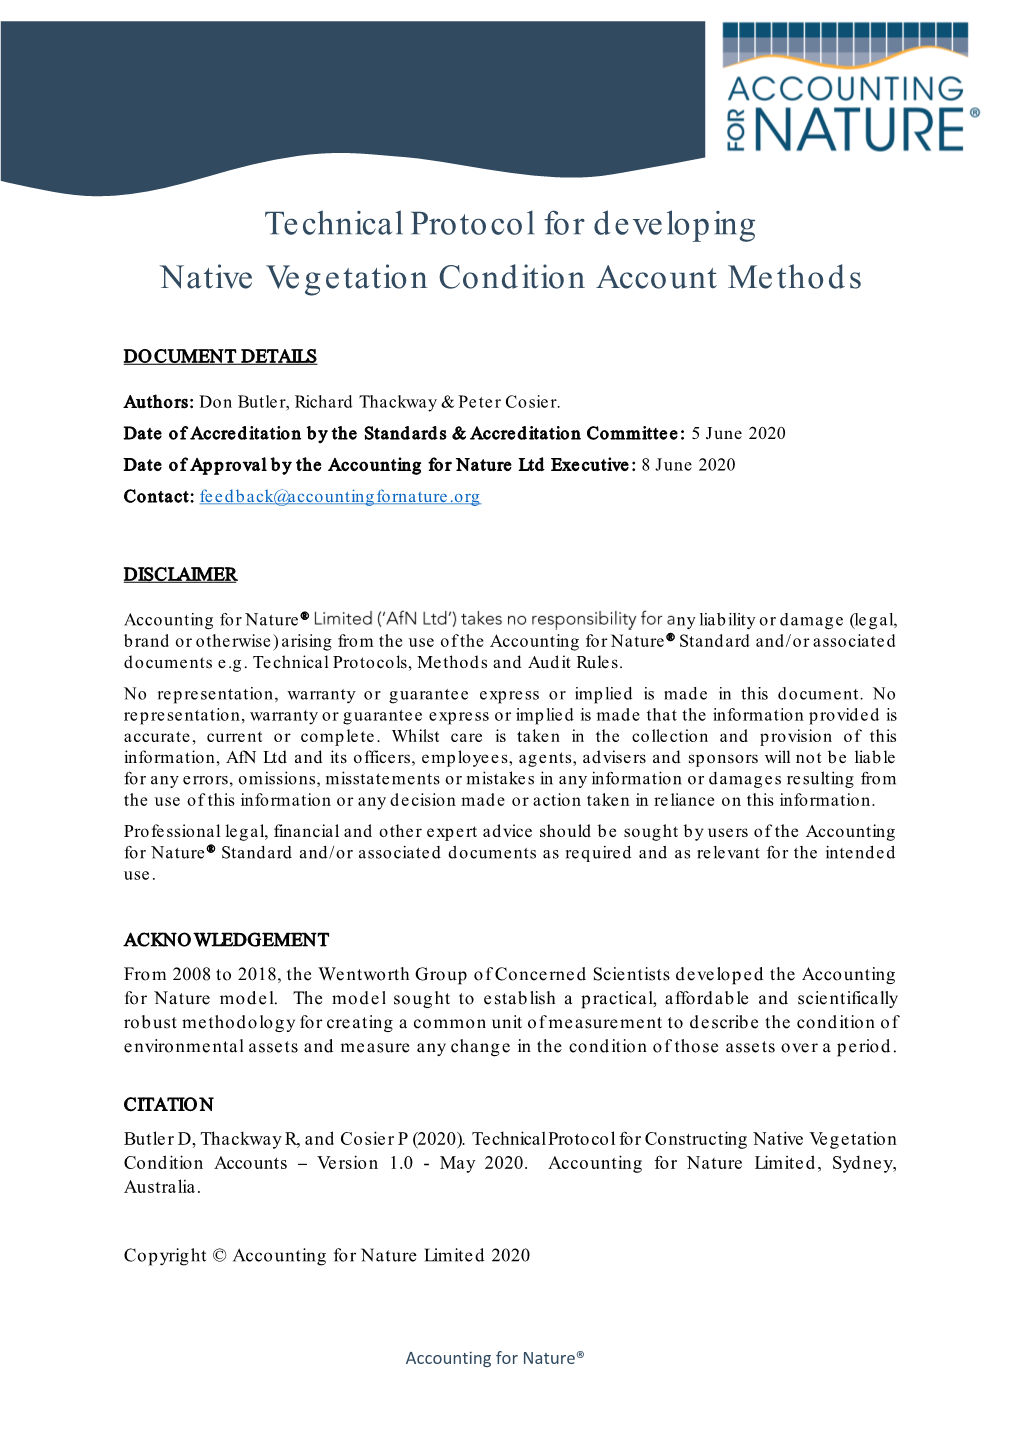 Technical Protocol for Developing Native Vegetation Condition Account Methods